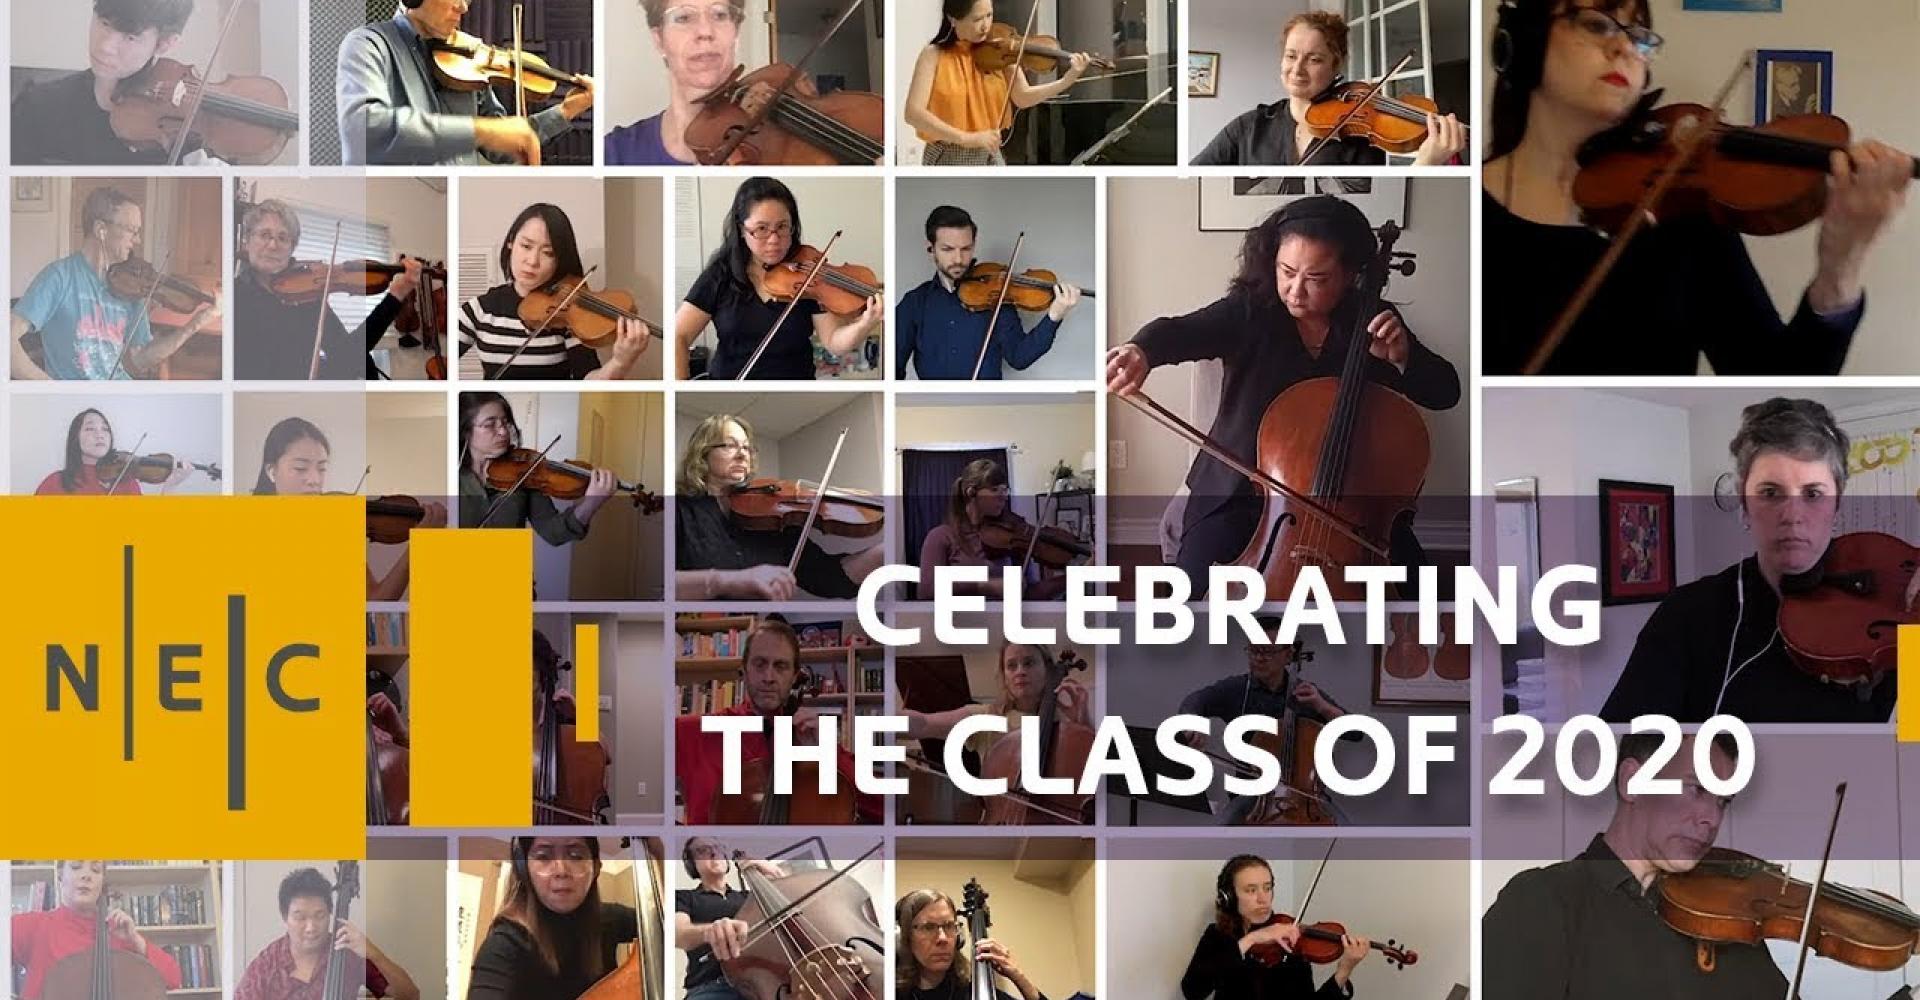 Text: Celebrating the Class of 2020, over a composite images of about 30 musicians playing music together via individual video.